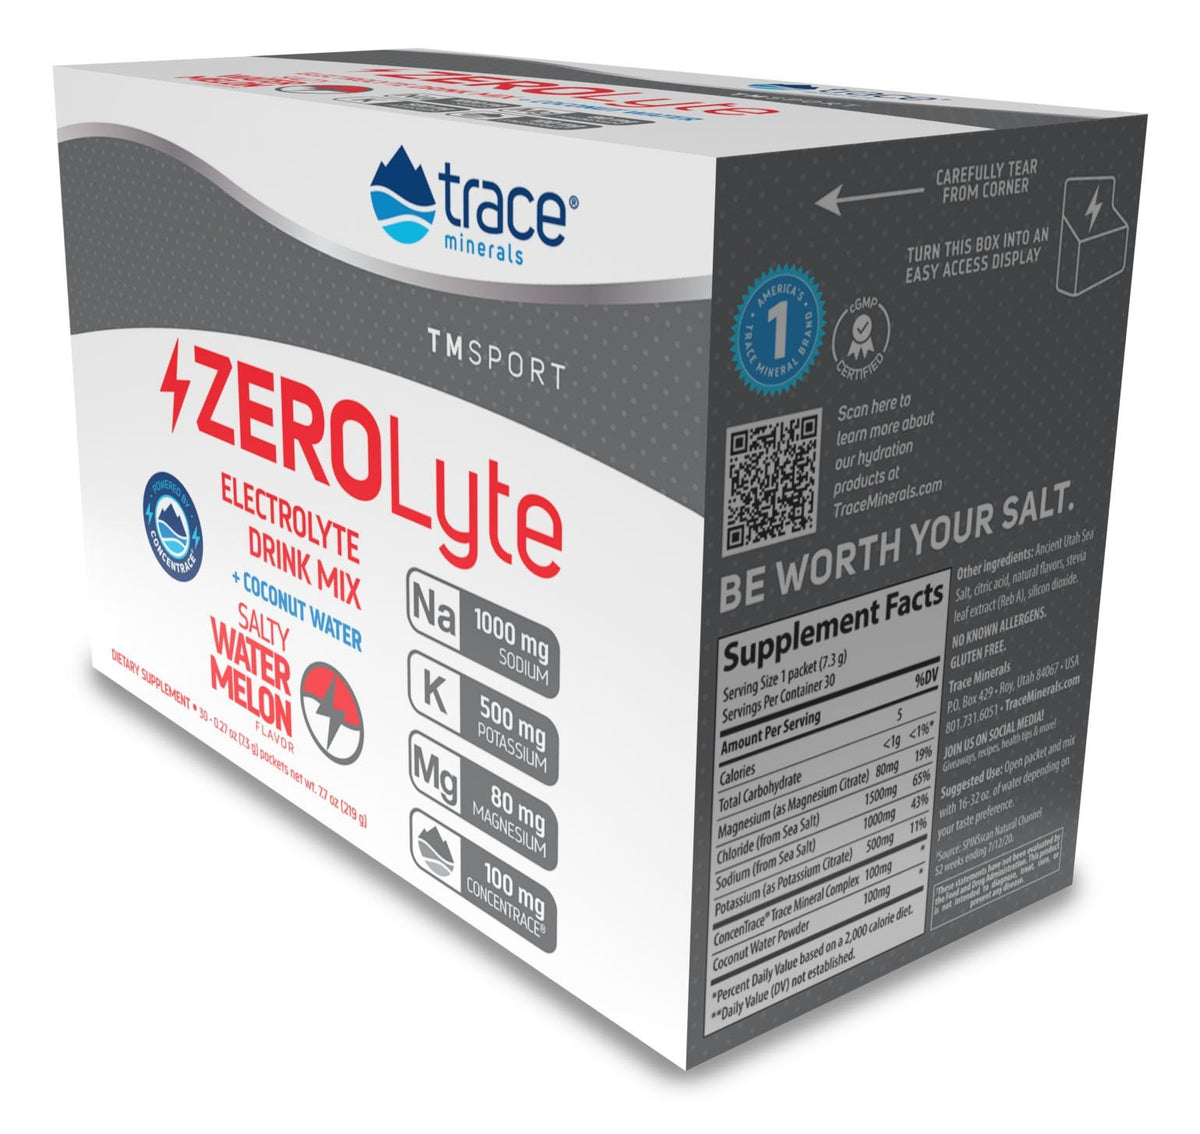 Trace Minerals TMSPORT-ZeroLyte-Electrolyte Drink Mix + Coconut Water-ZeroLyte-Salty Watermelon Flavor 30 Packets Box